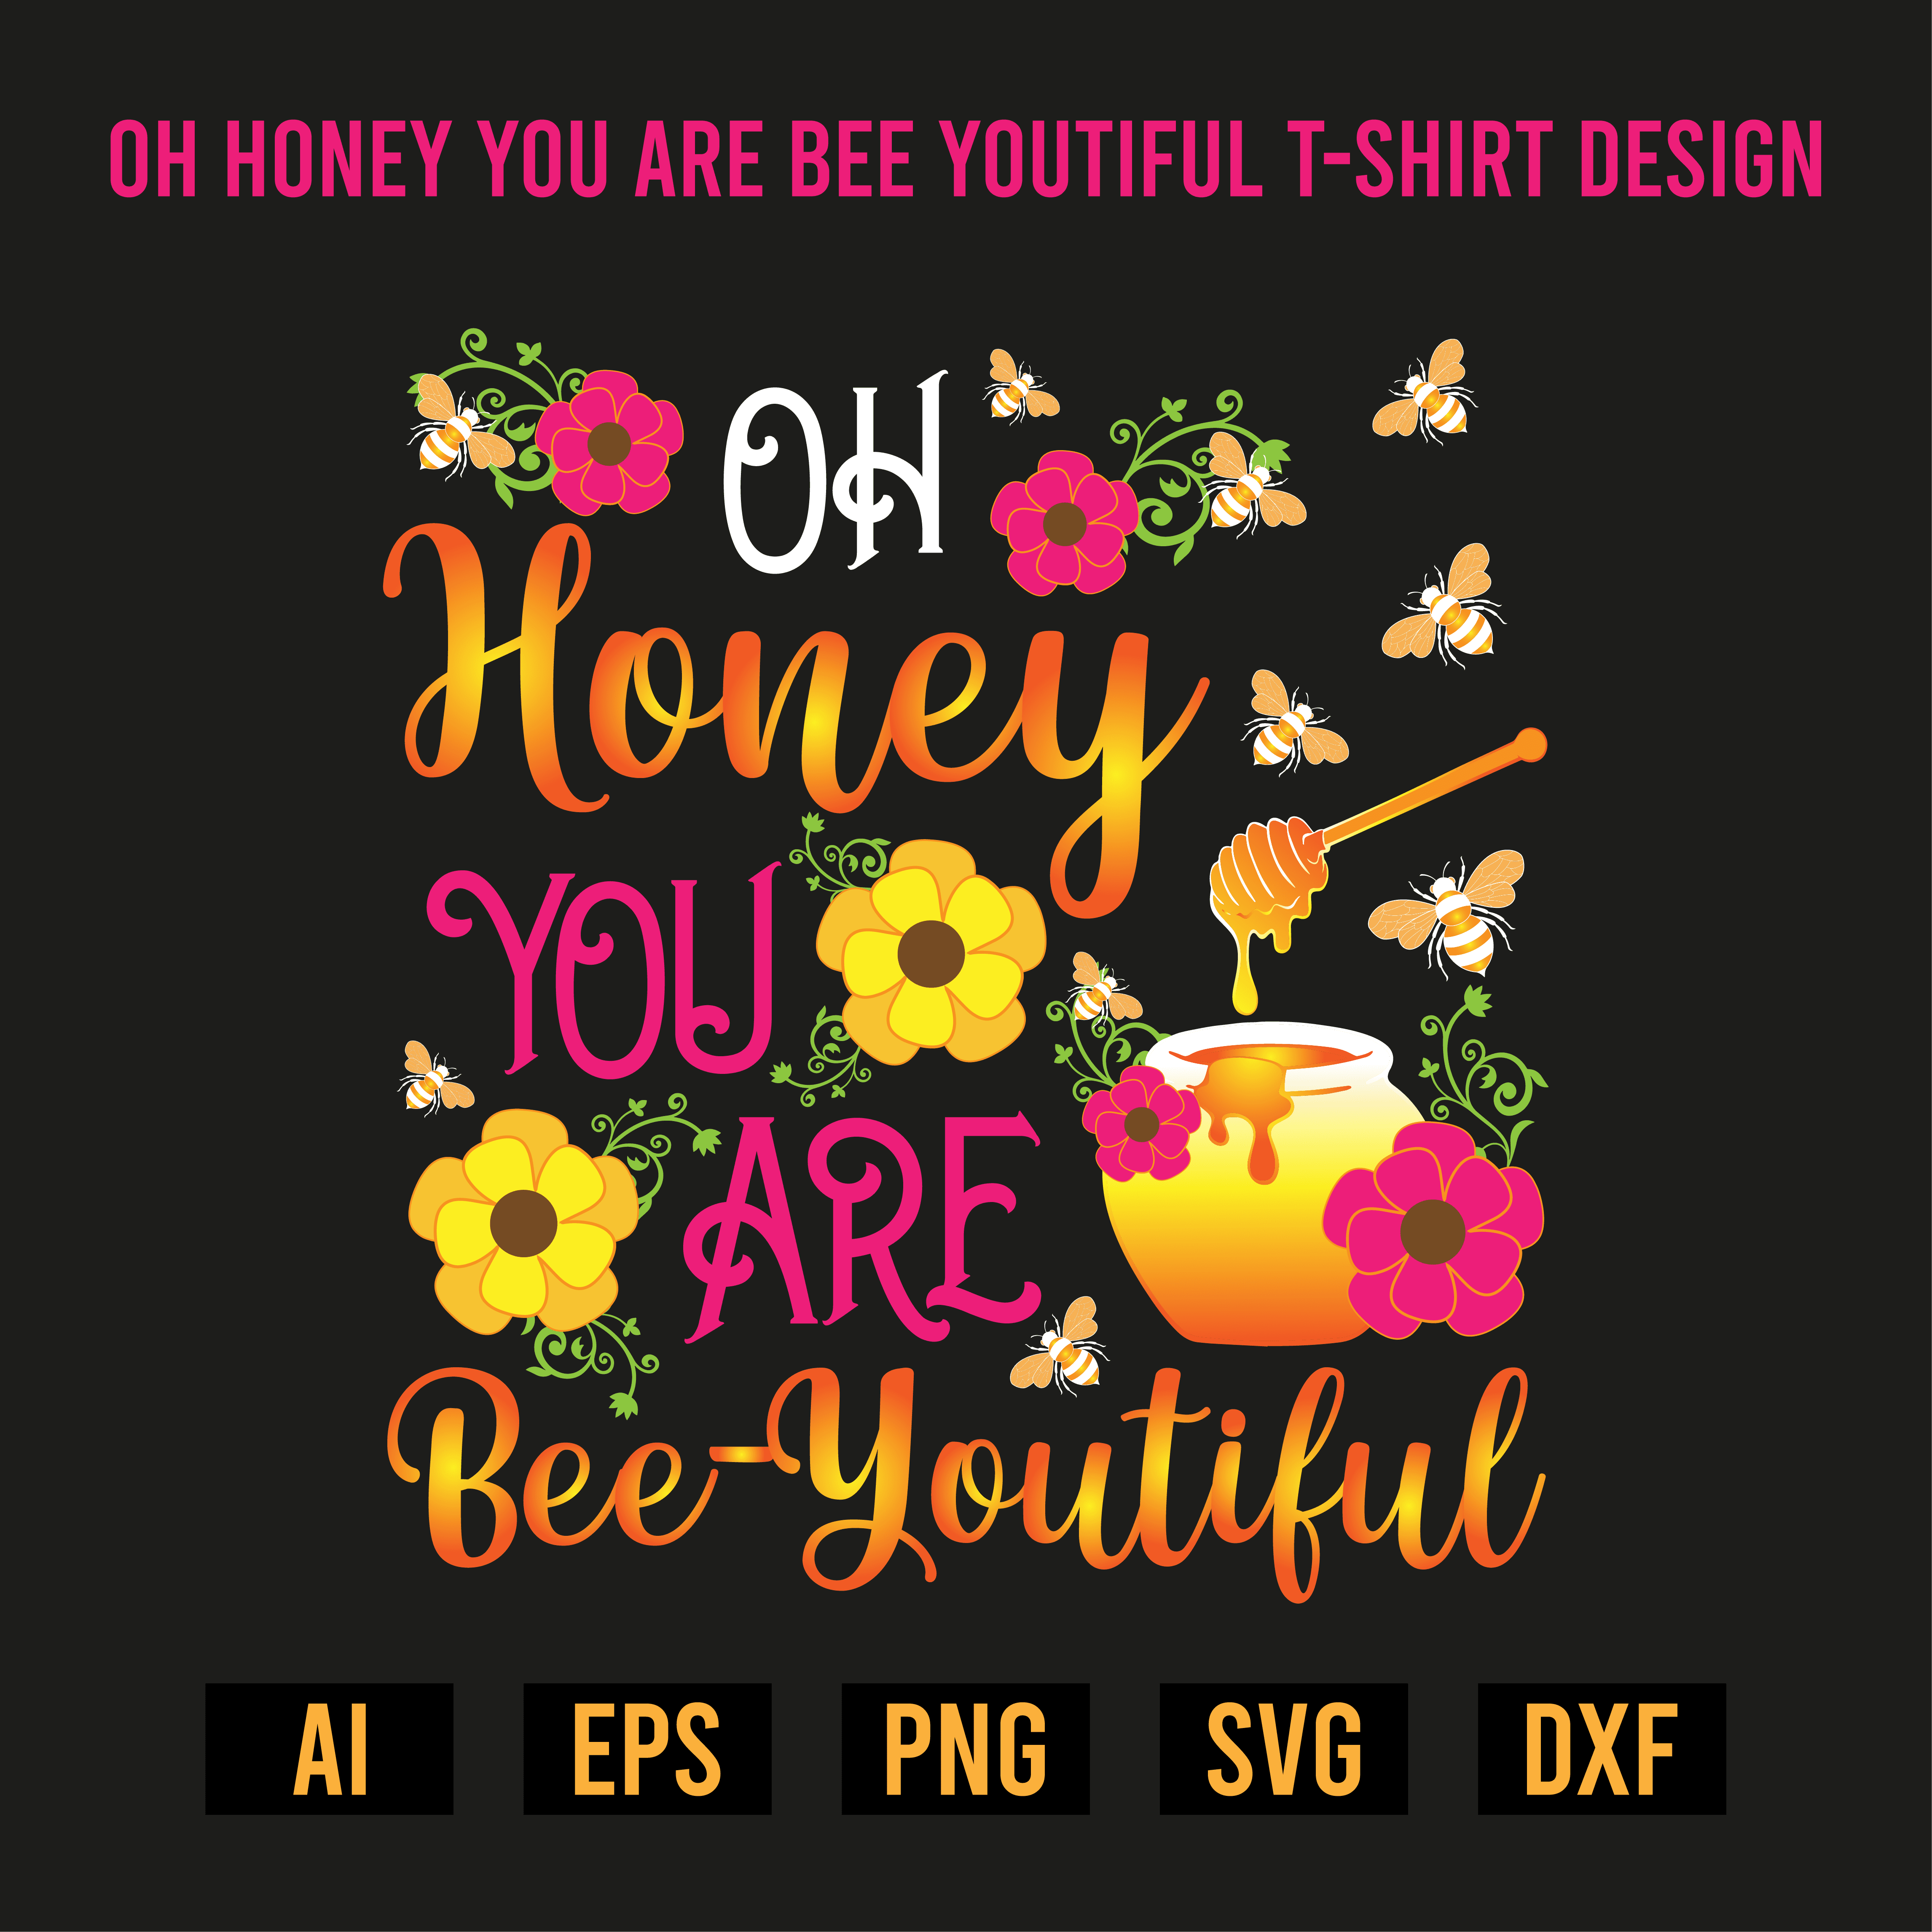 Oh Honey You Are Bee Youtiful T- Shirt Design cover image.